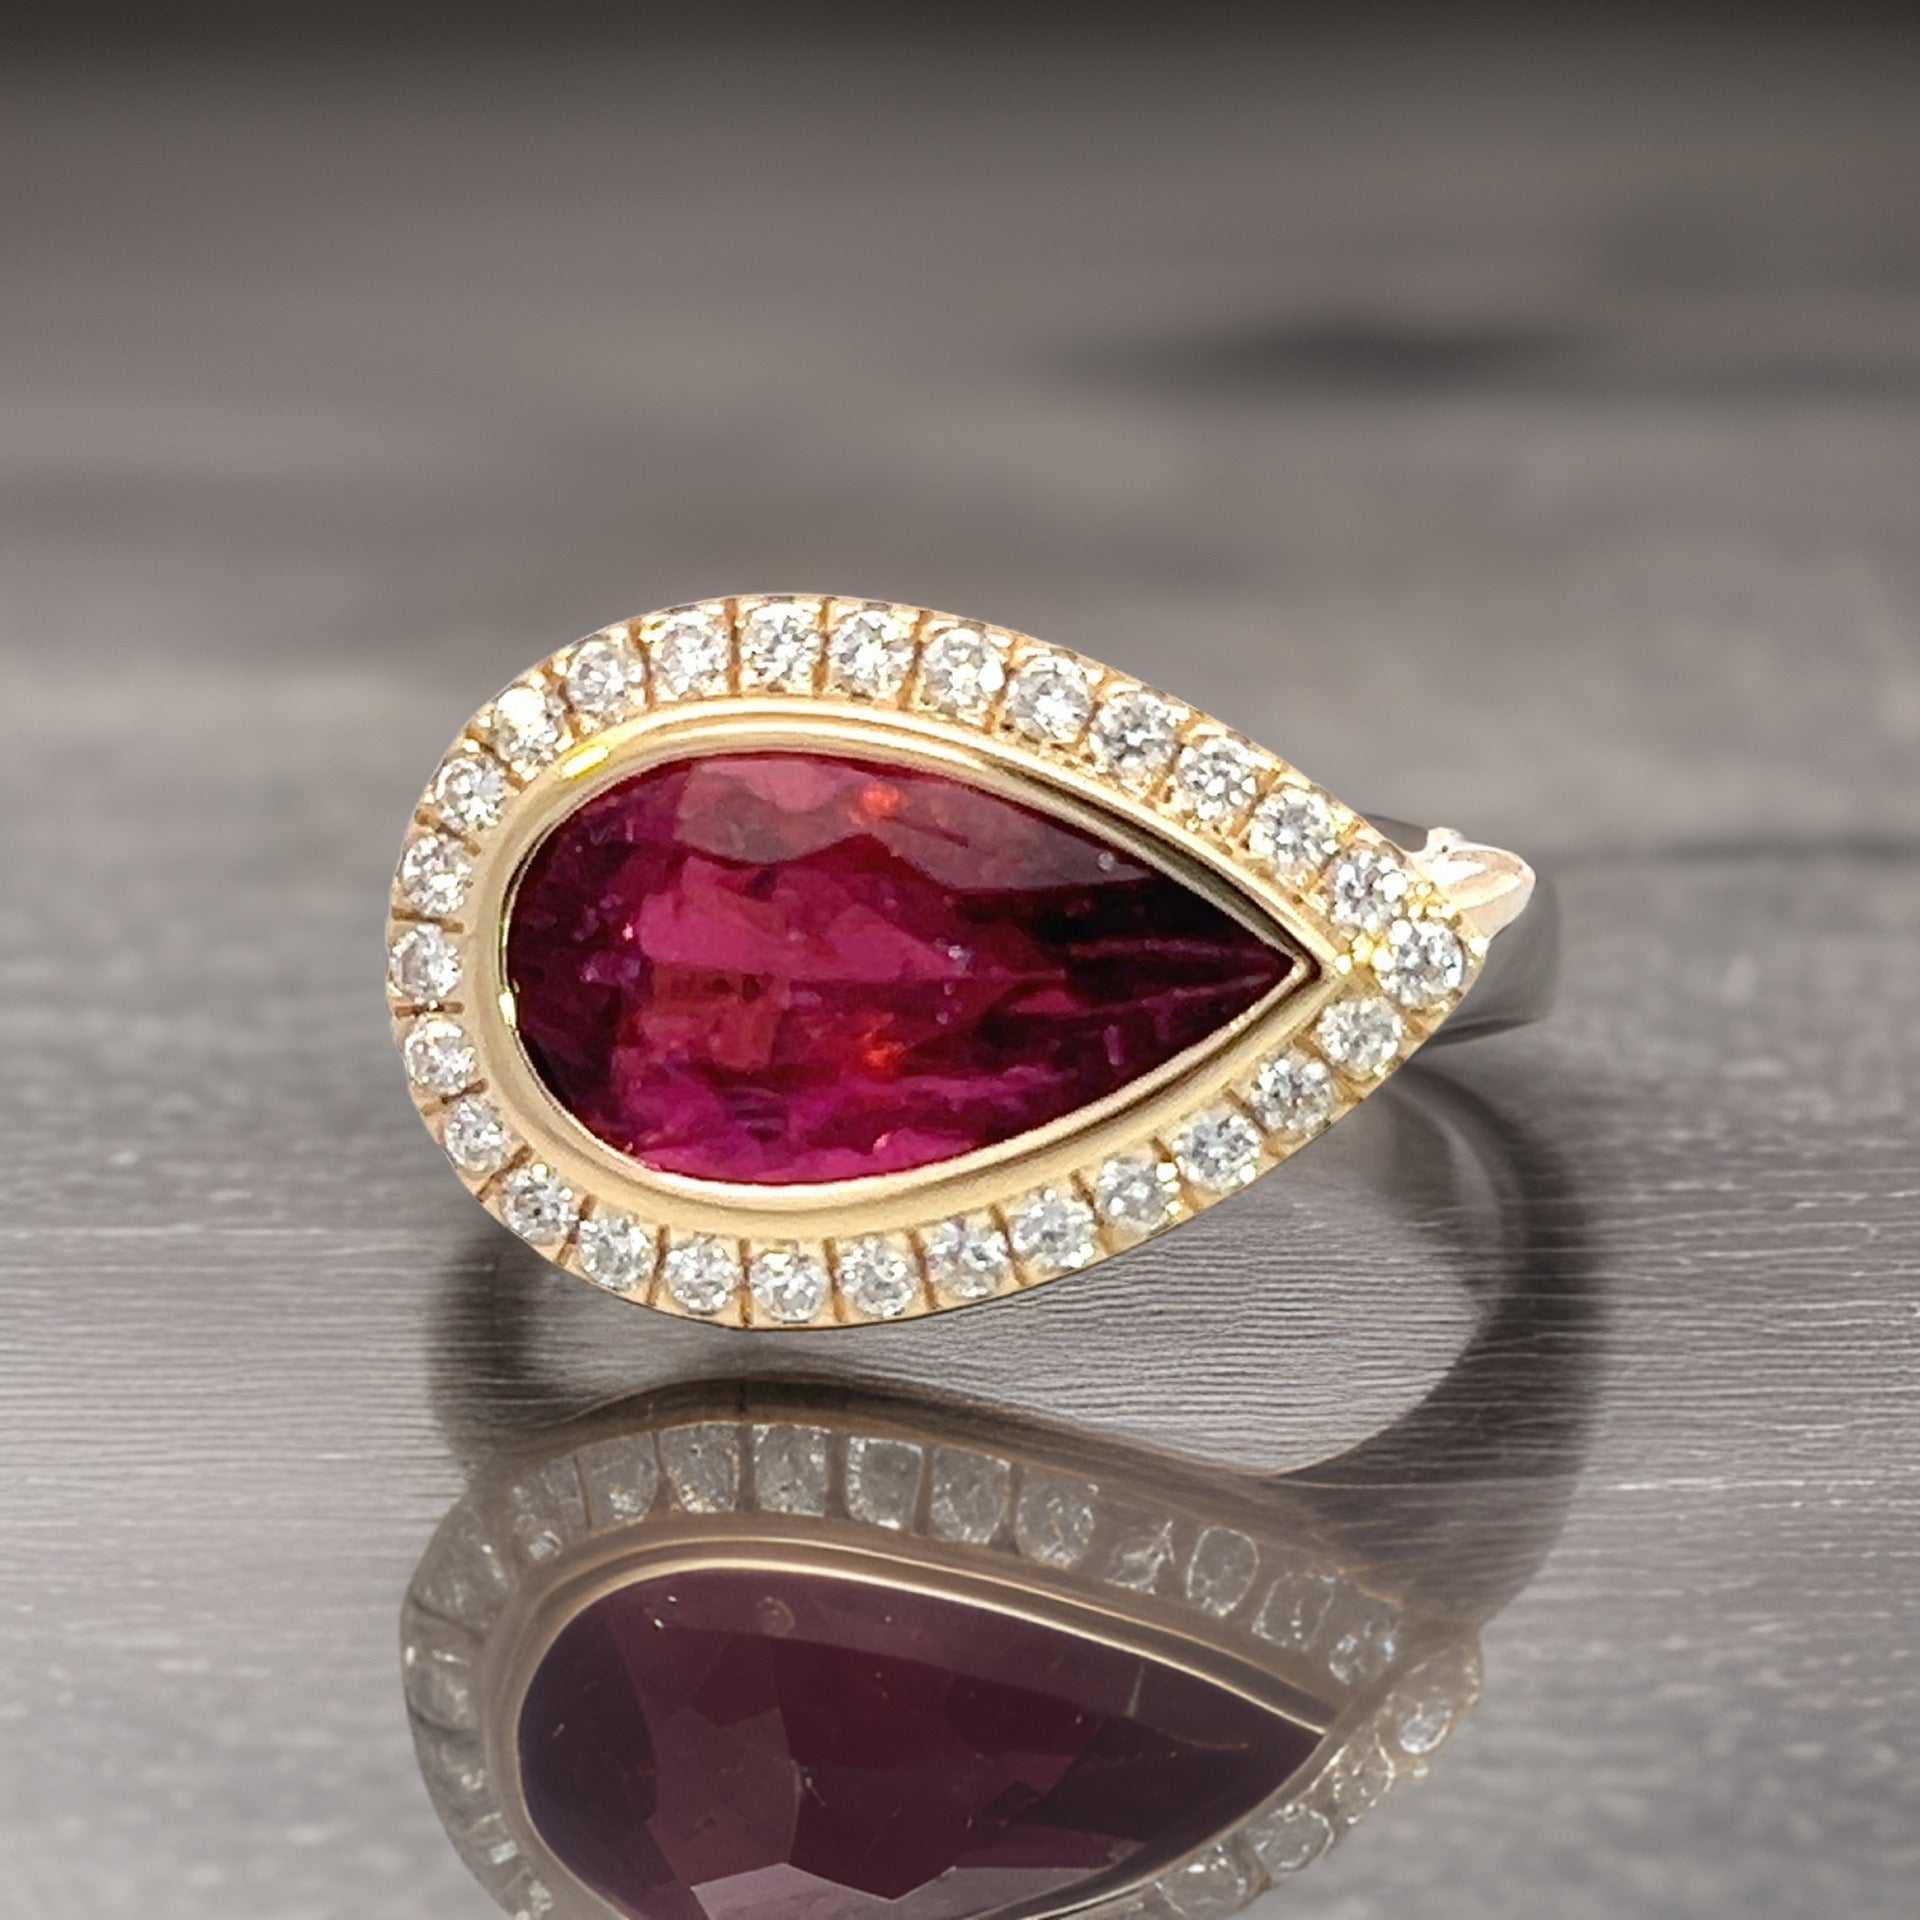 Natural Rubellite Diamond Ring 6.5 14k Y Gold 4.68 TCW Certified $5,950 310648 - Certified Fine Jewelry